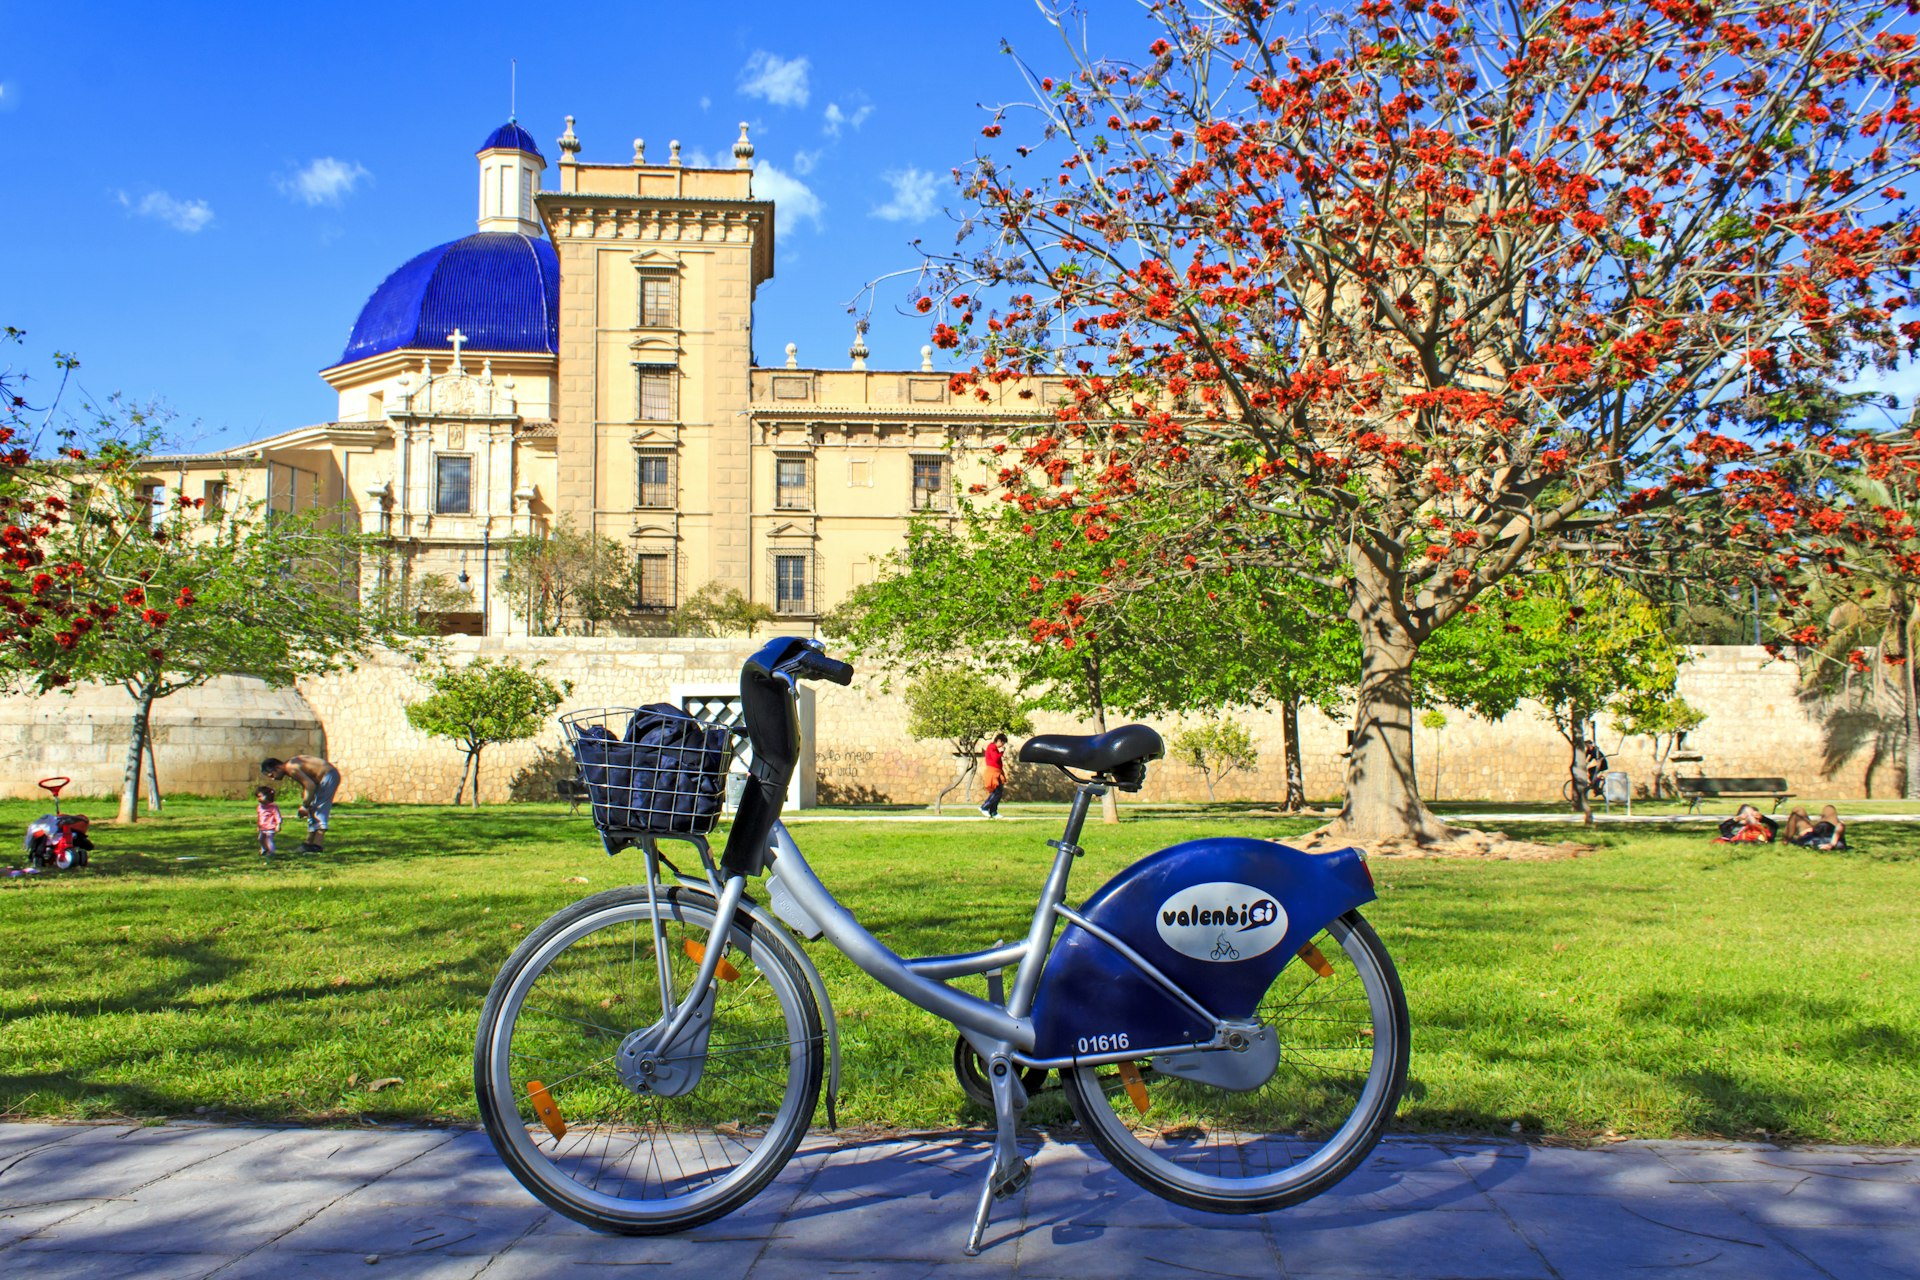 Valencia free rental city bicycle "Valenbisi" in front of the Museum of fine arts  in Valencia, Spain